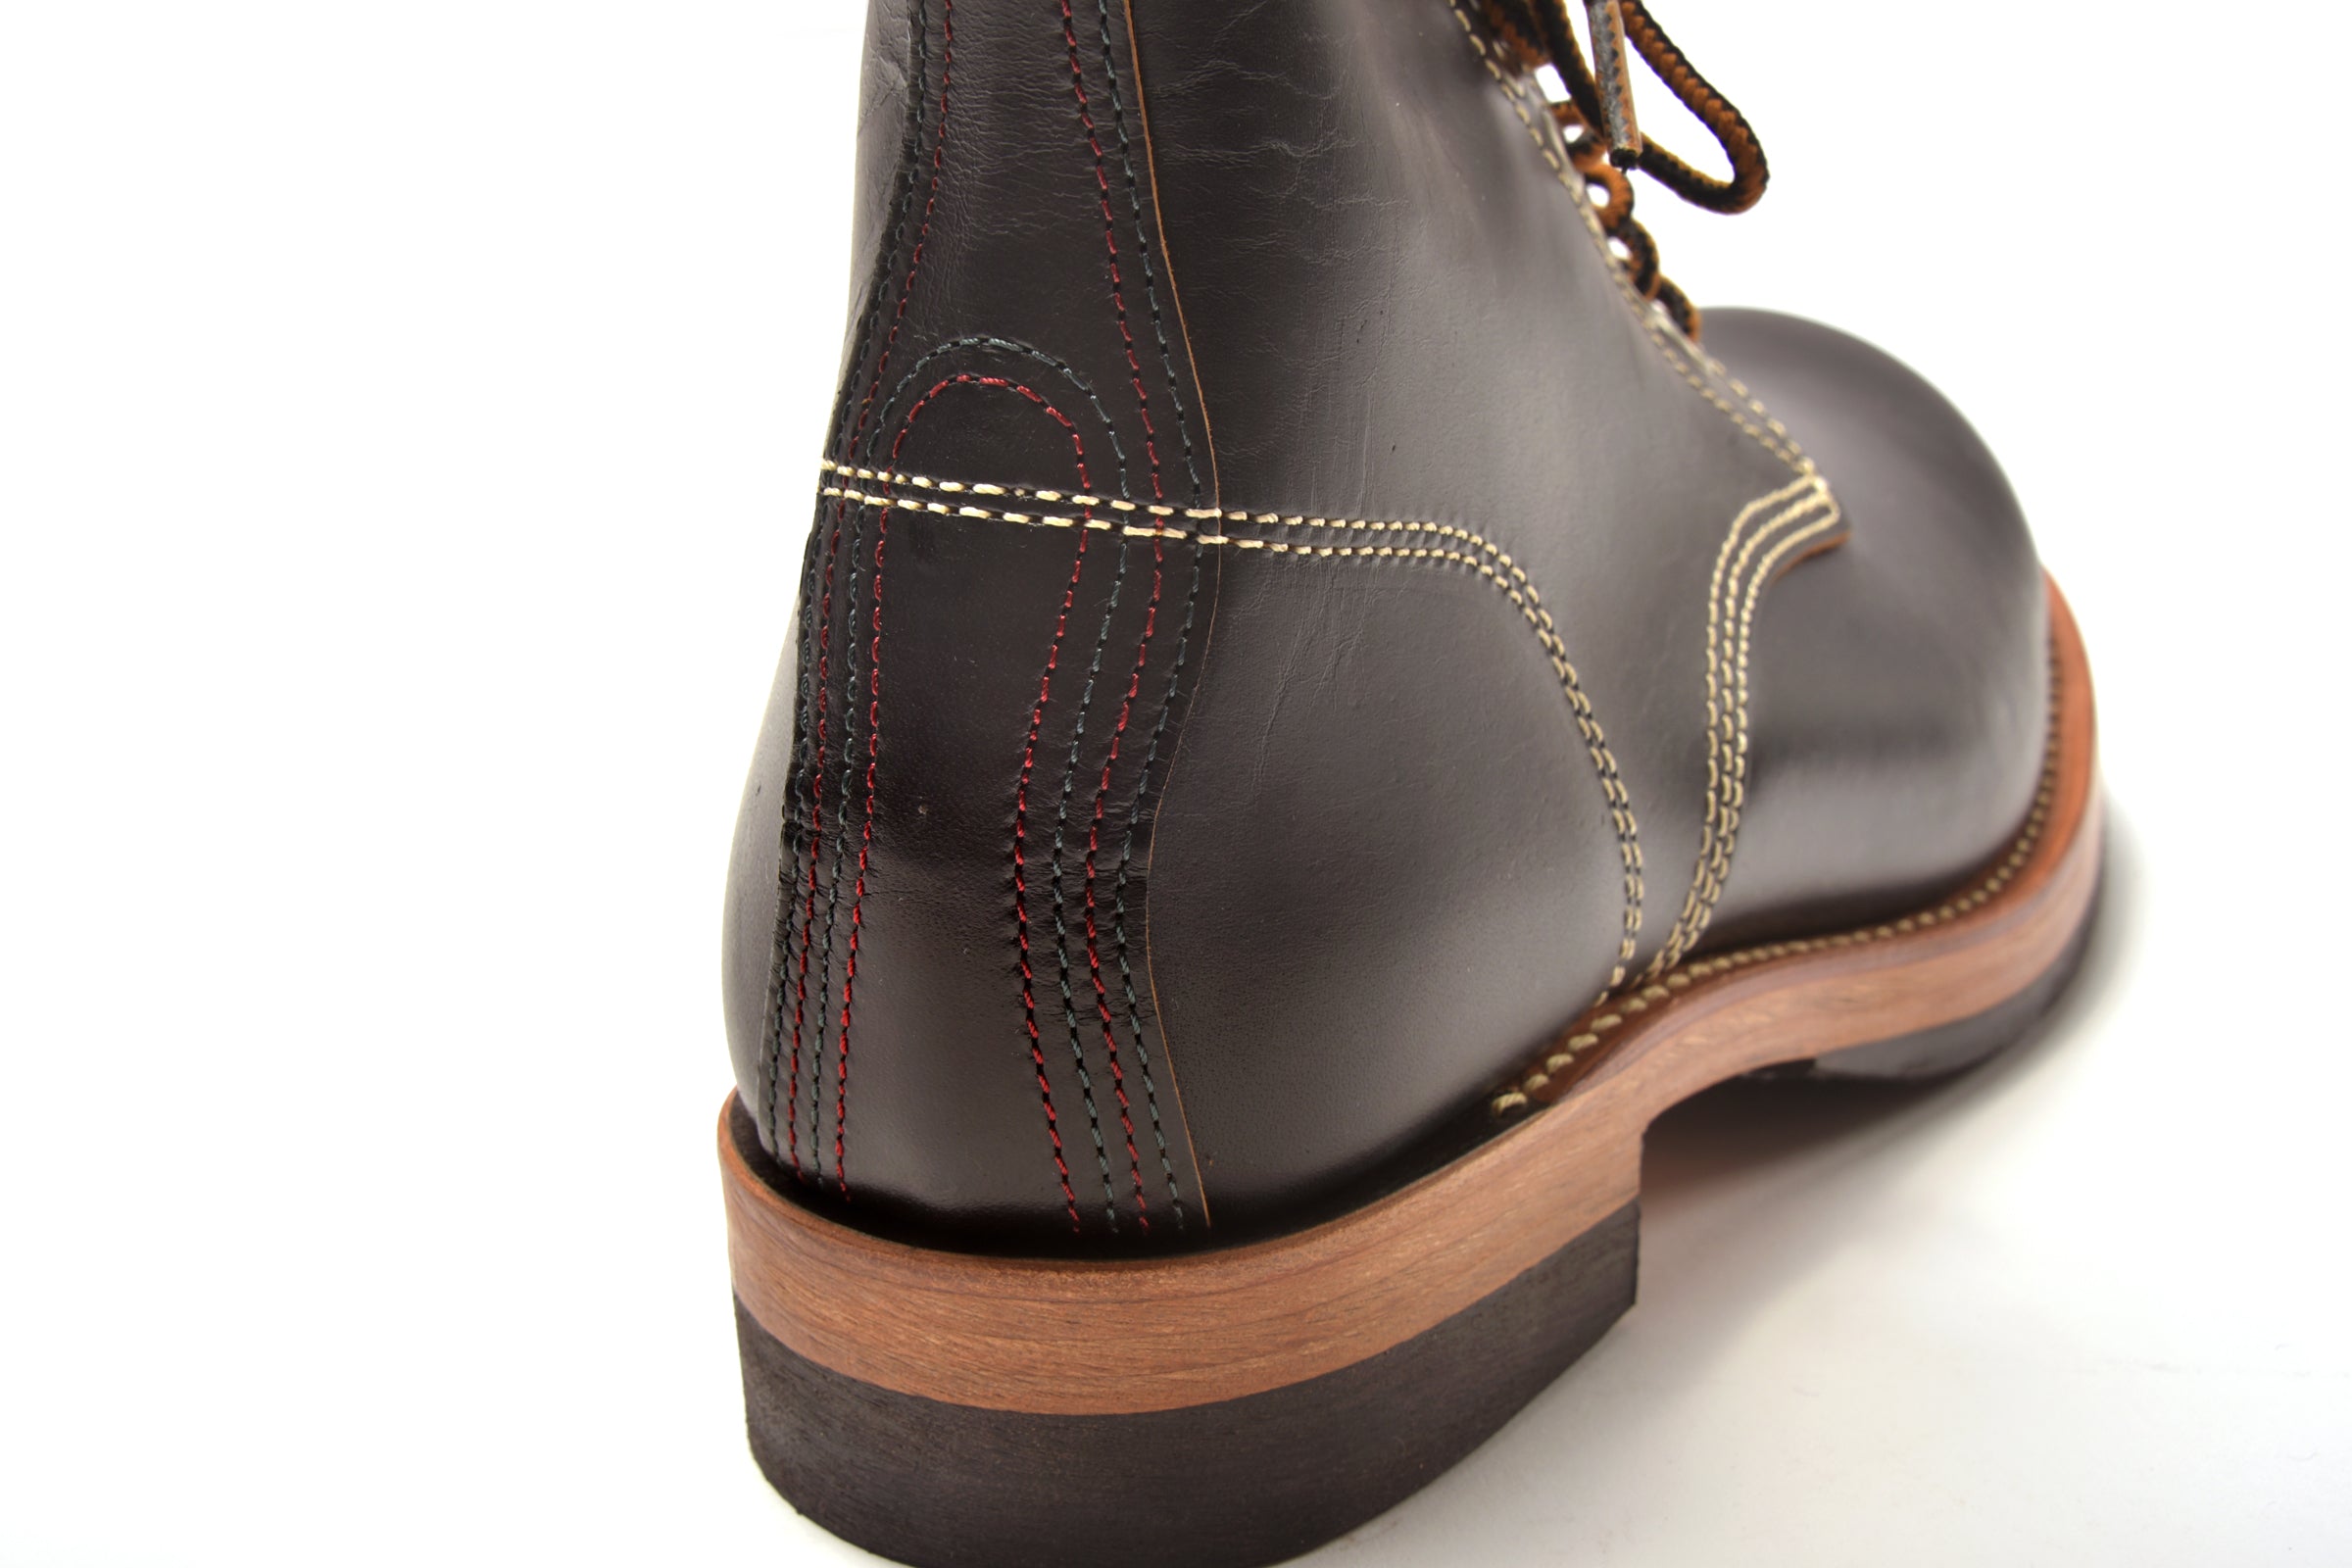 WORK BOOTS 'BEAR HEAD' – The Real McCoy's